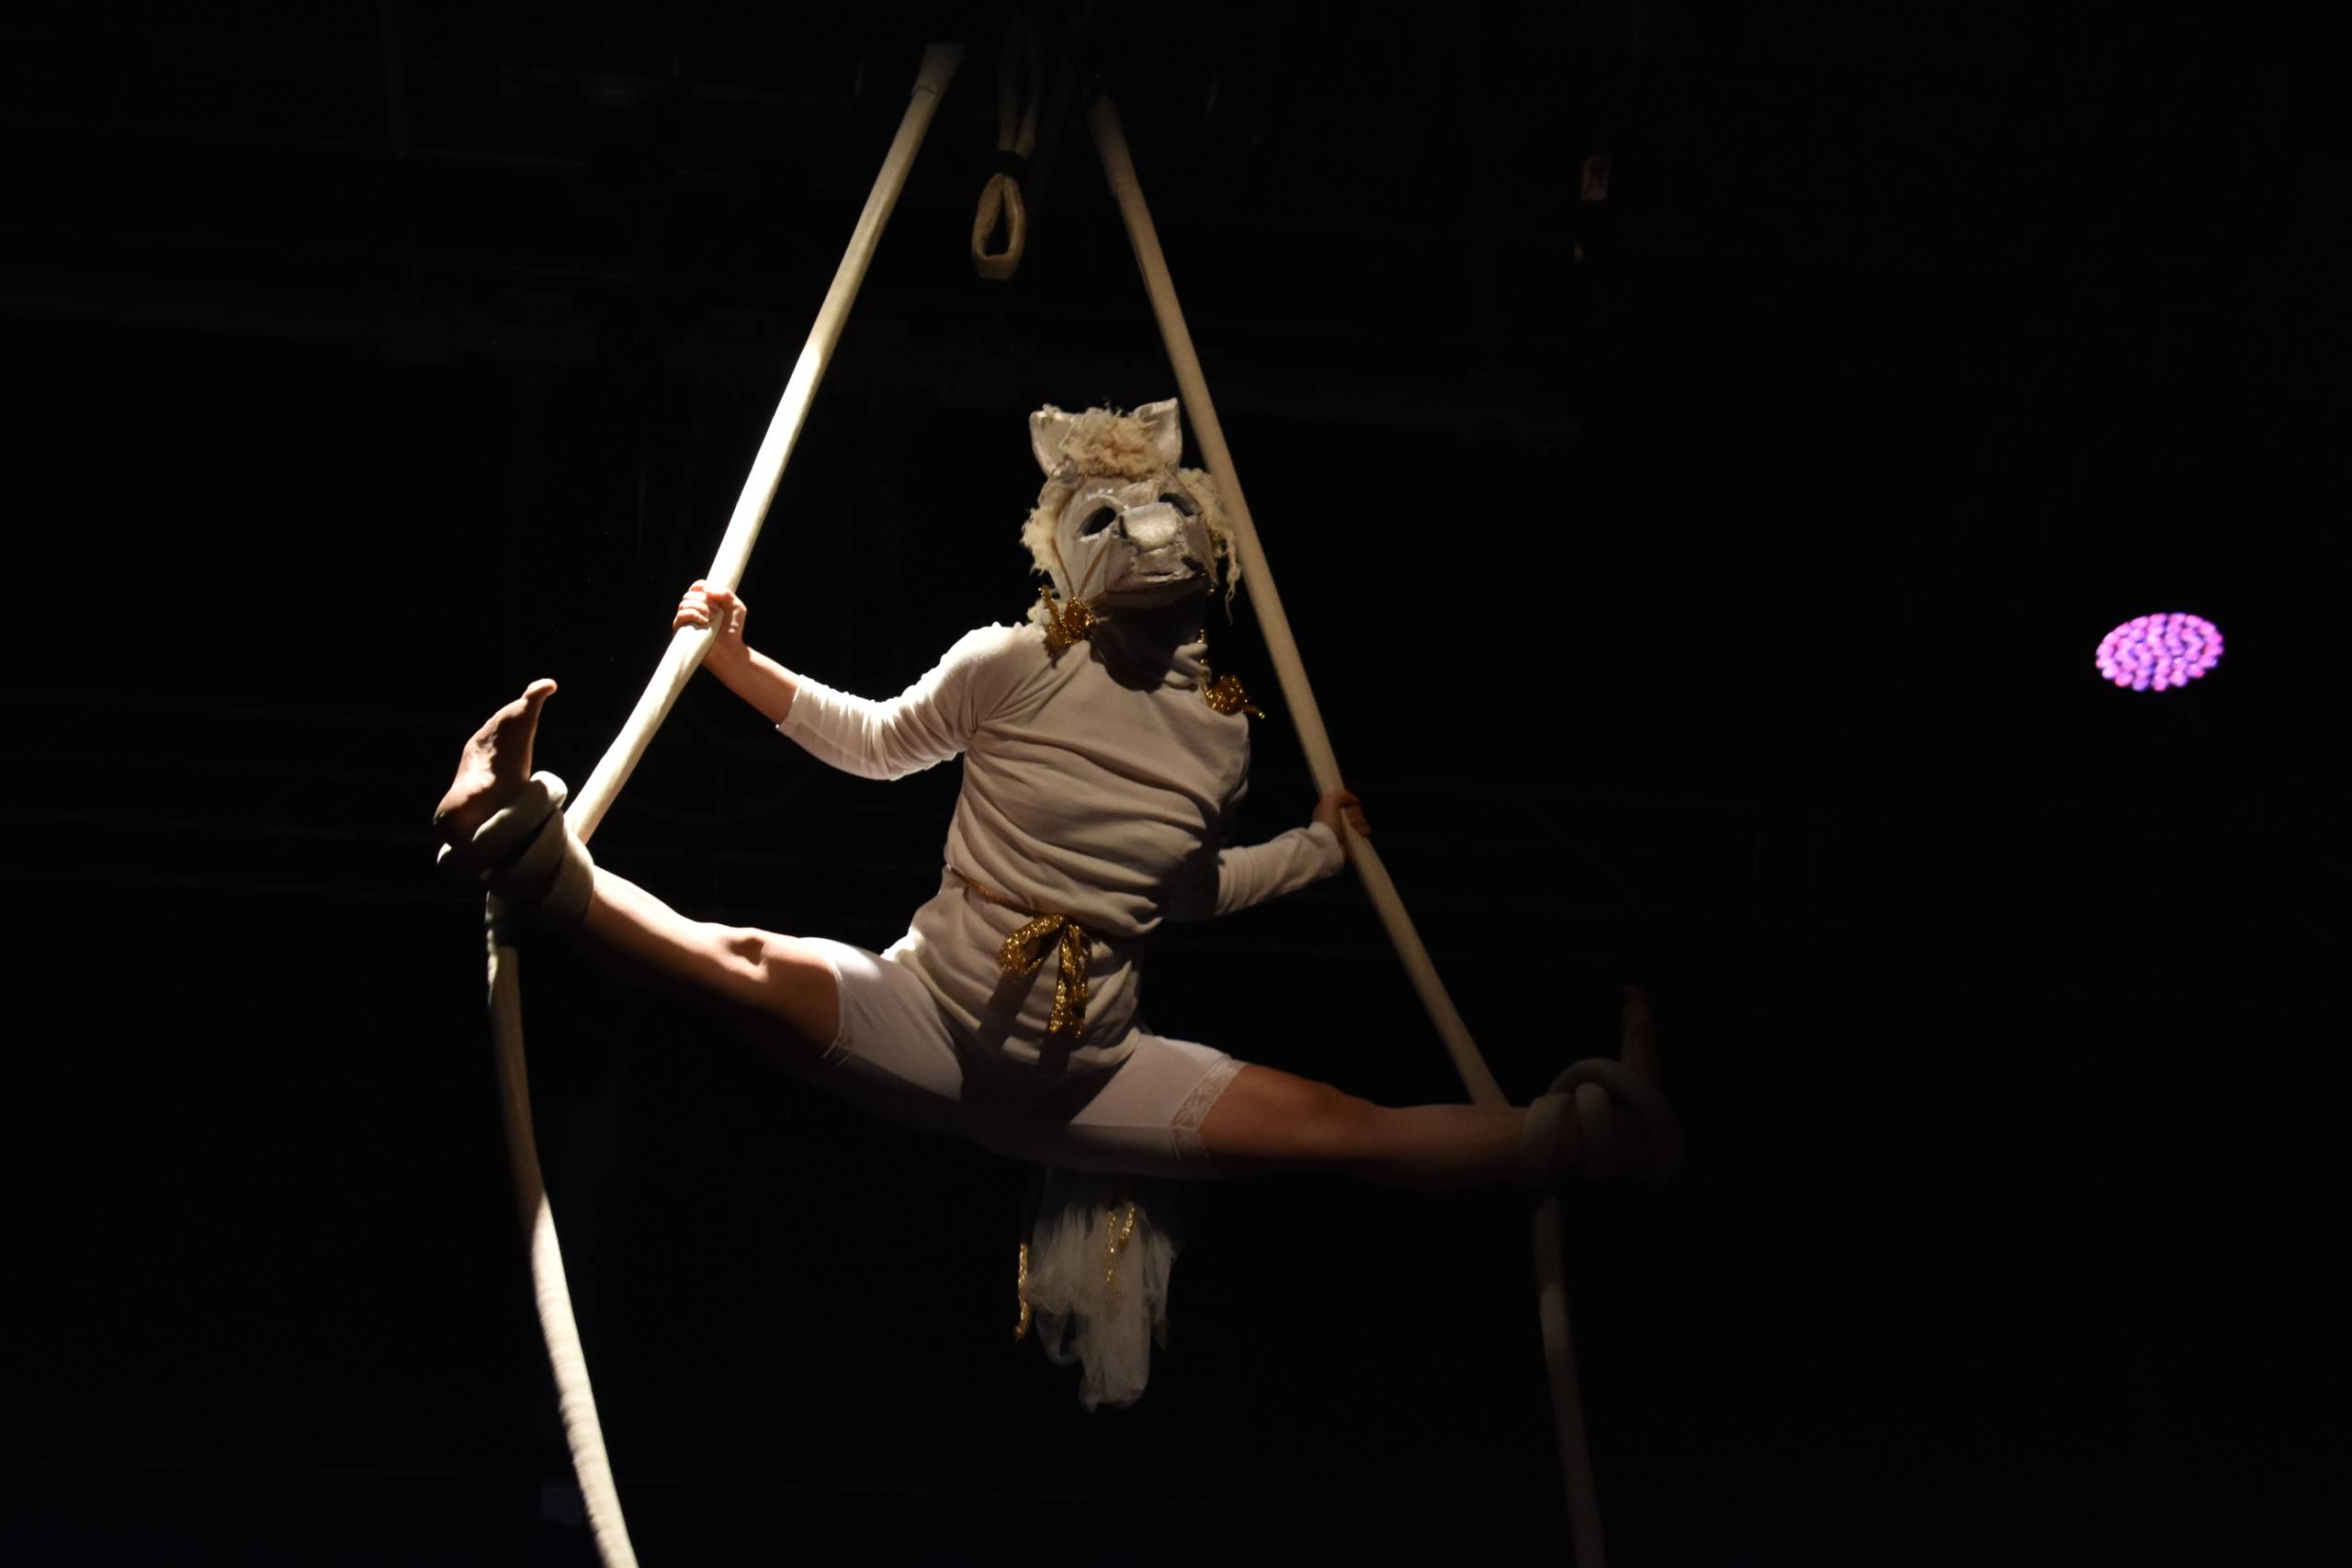 An aerial artist in an animal mask holds themselves up on a rope with their legs in box splits